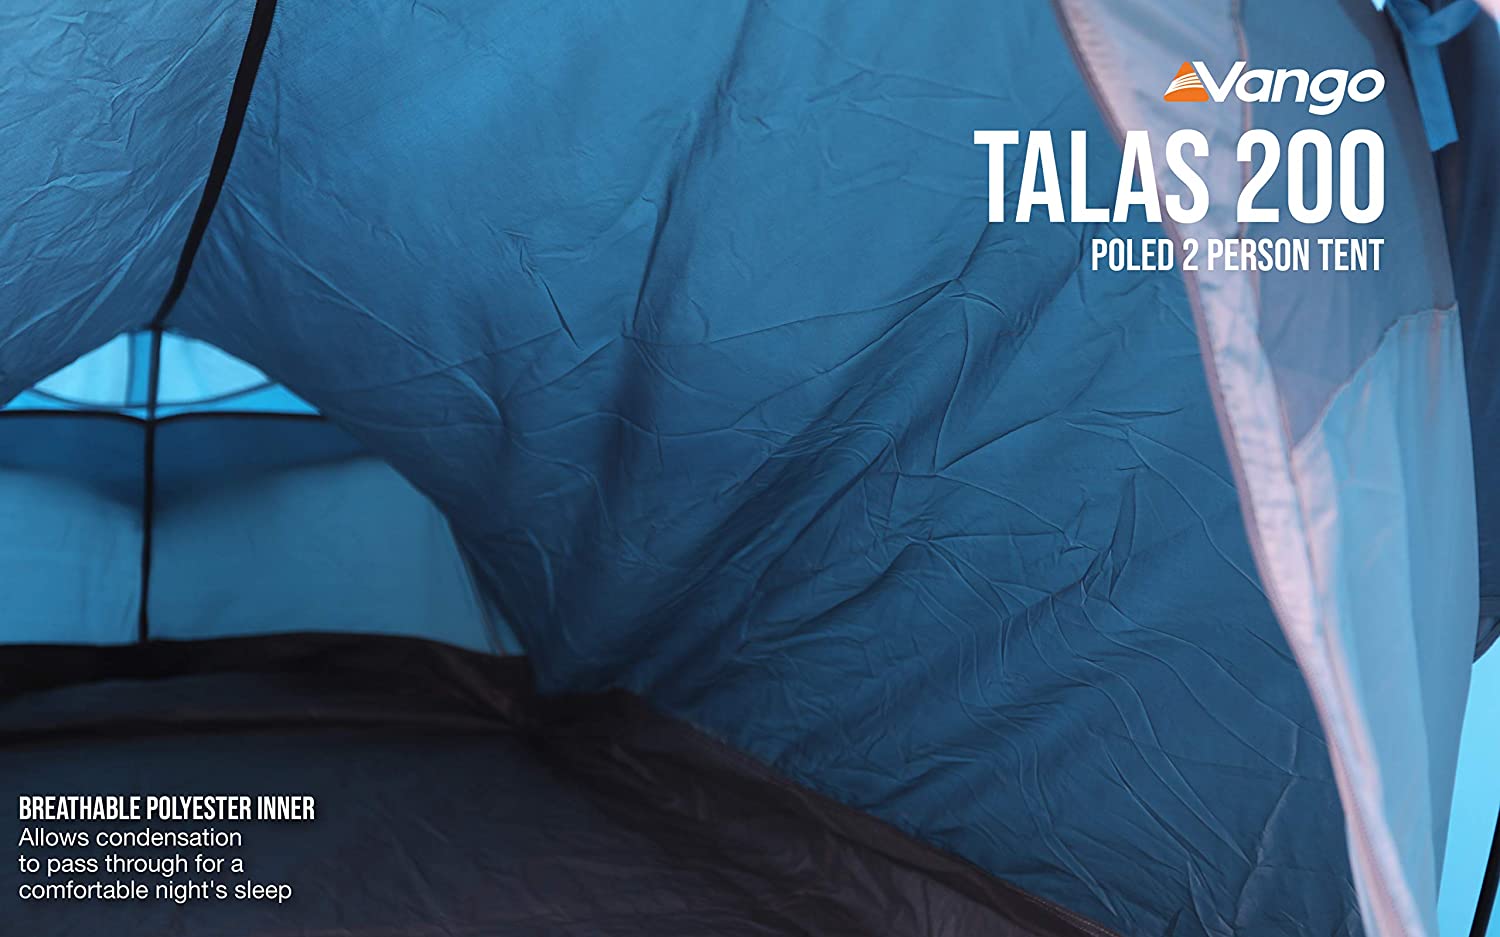 Vango Talas Tunnel Tent - Breathable Polyester Inner